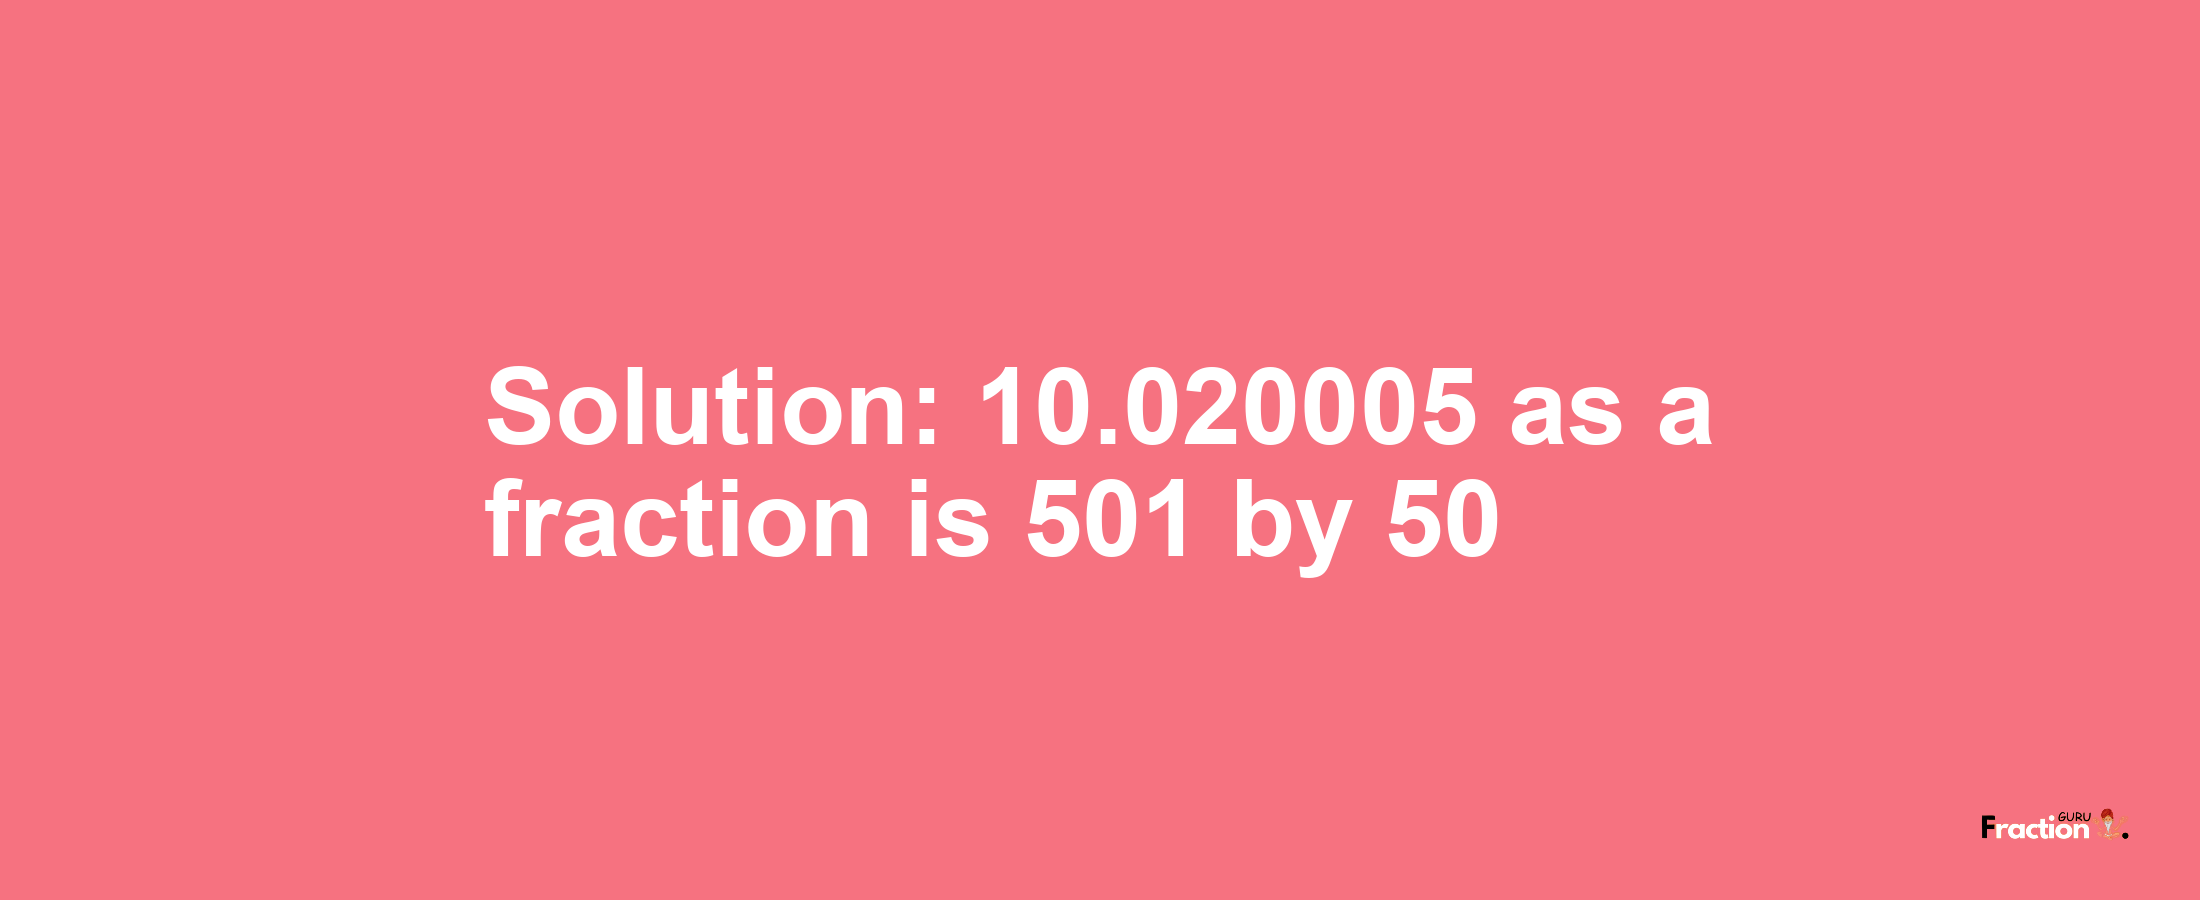 Solution:10.020005 as a fraction is 501/50